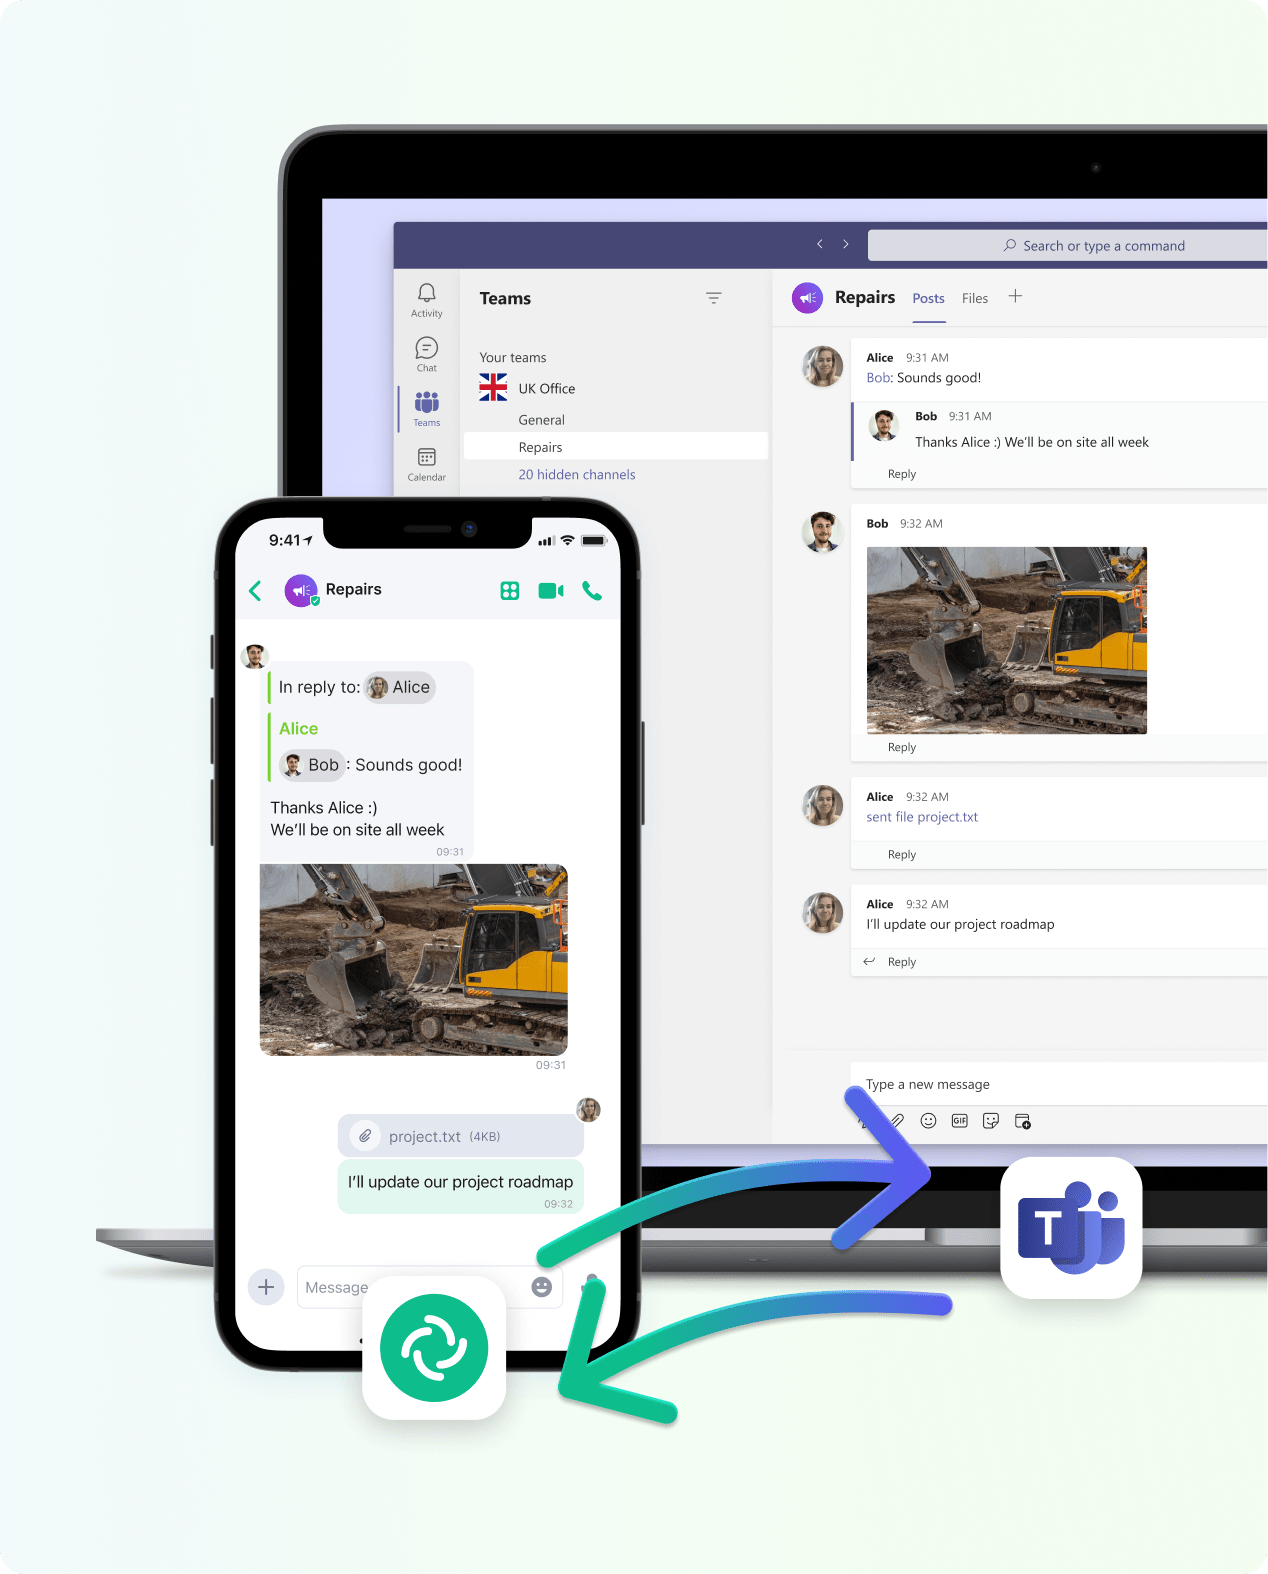 An image depicting the element messaging app on mobile for those on the frontline, communicating with those using teams at the office or at home.